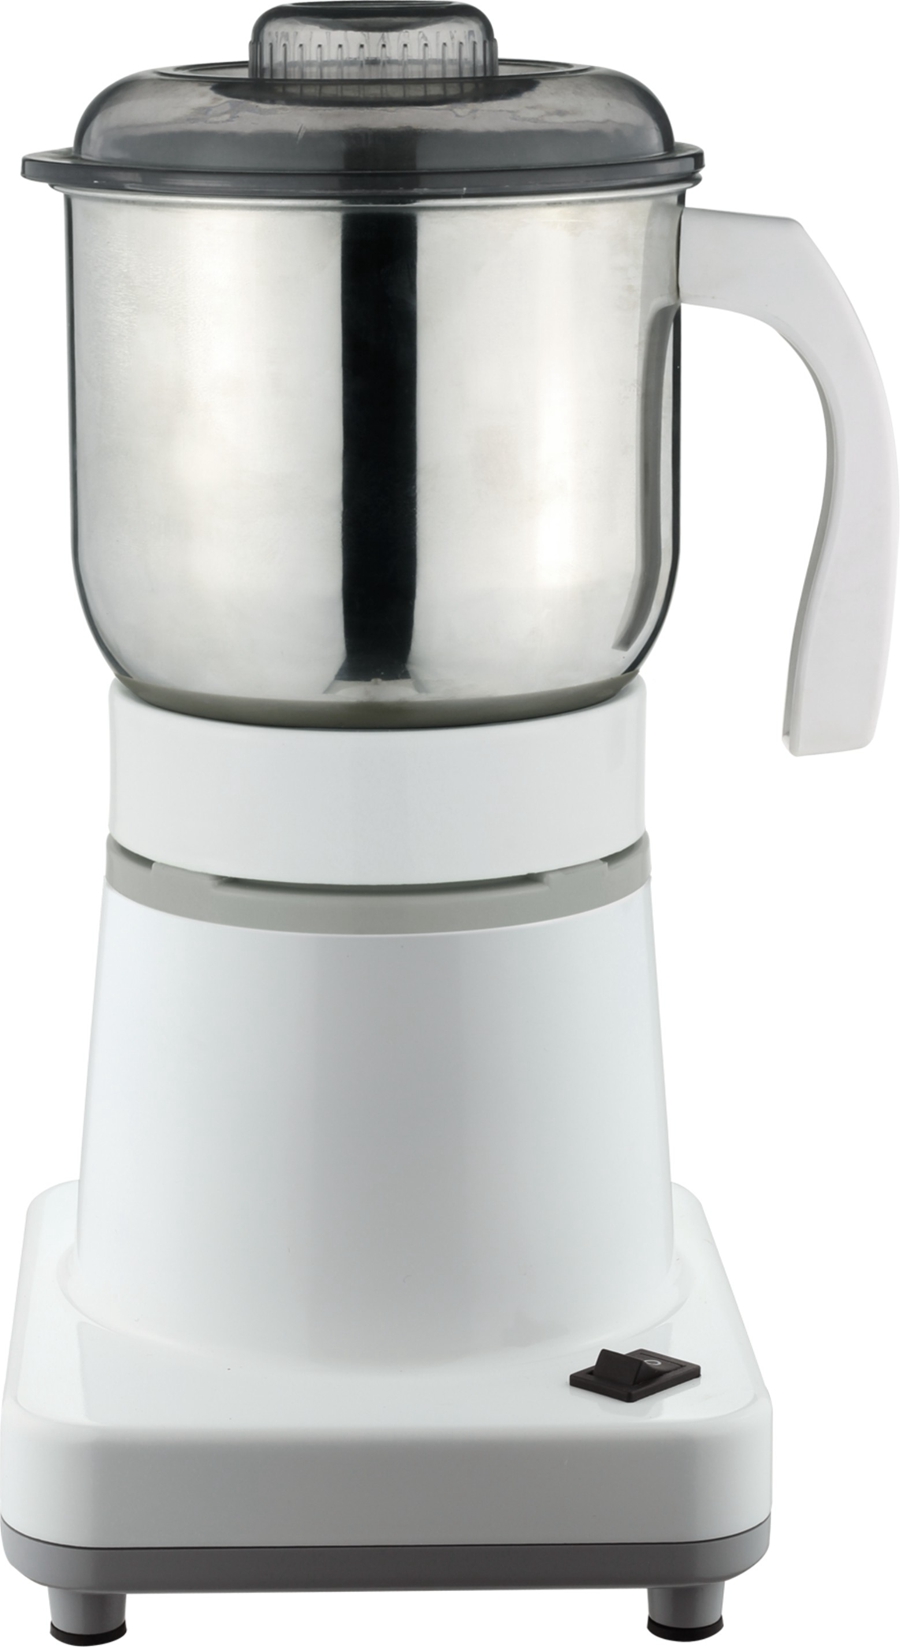 Standard coffee grinder for home use